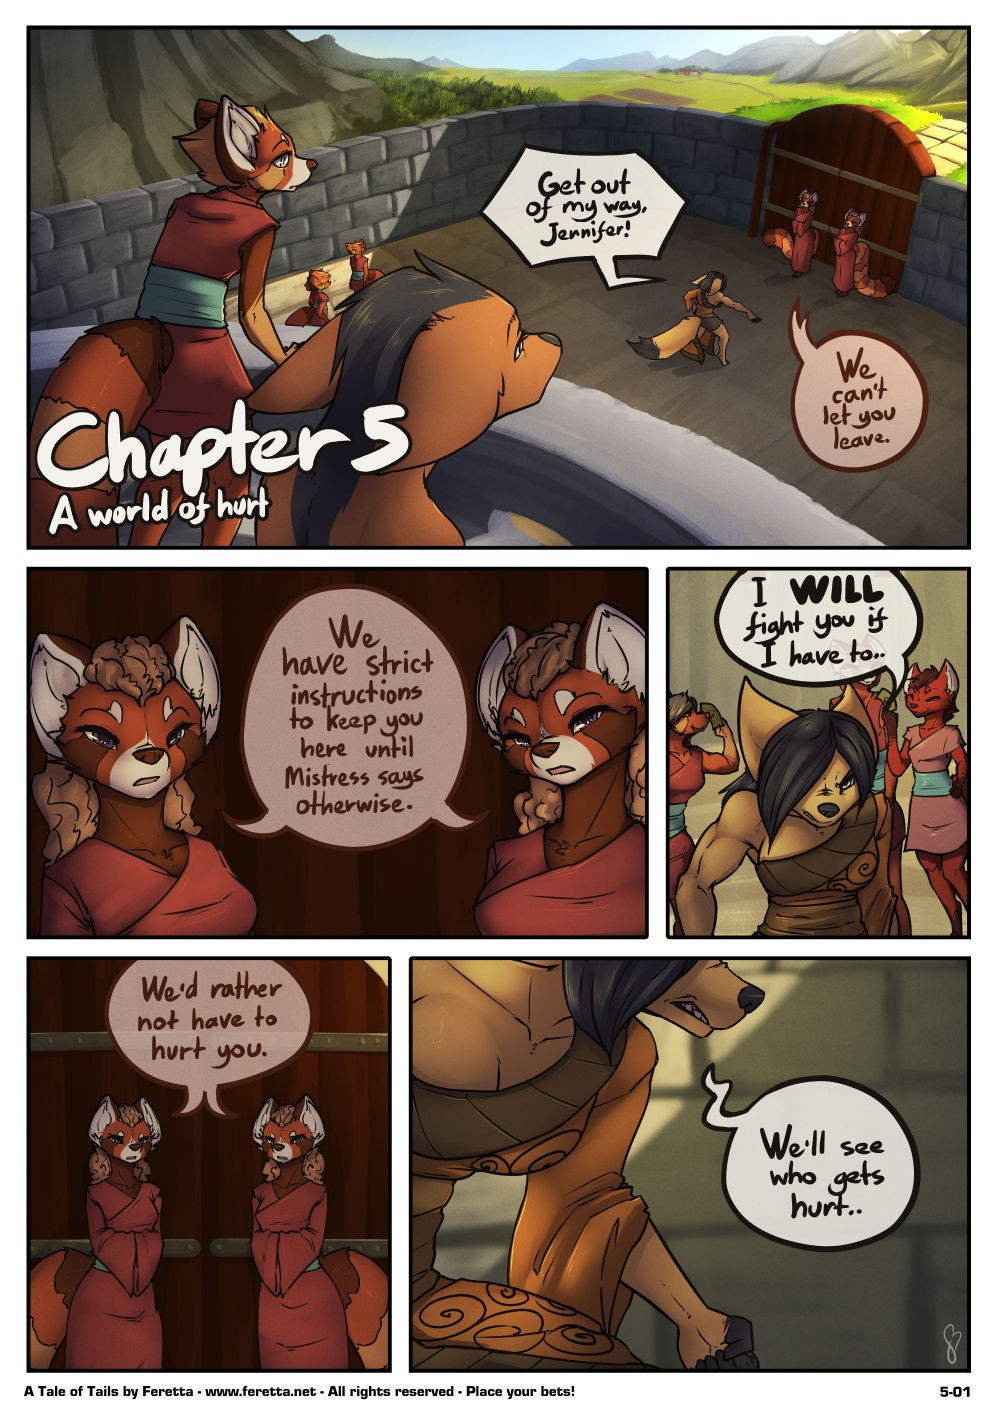 A Tale of Tails: Chapter 5 - A World of Hurt porn comic picture 1